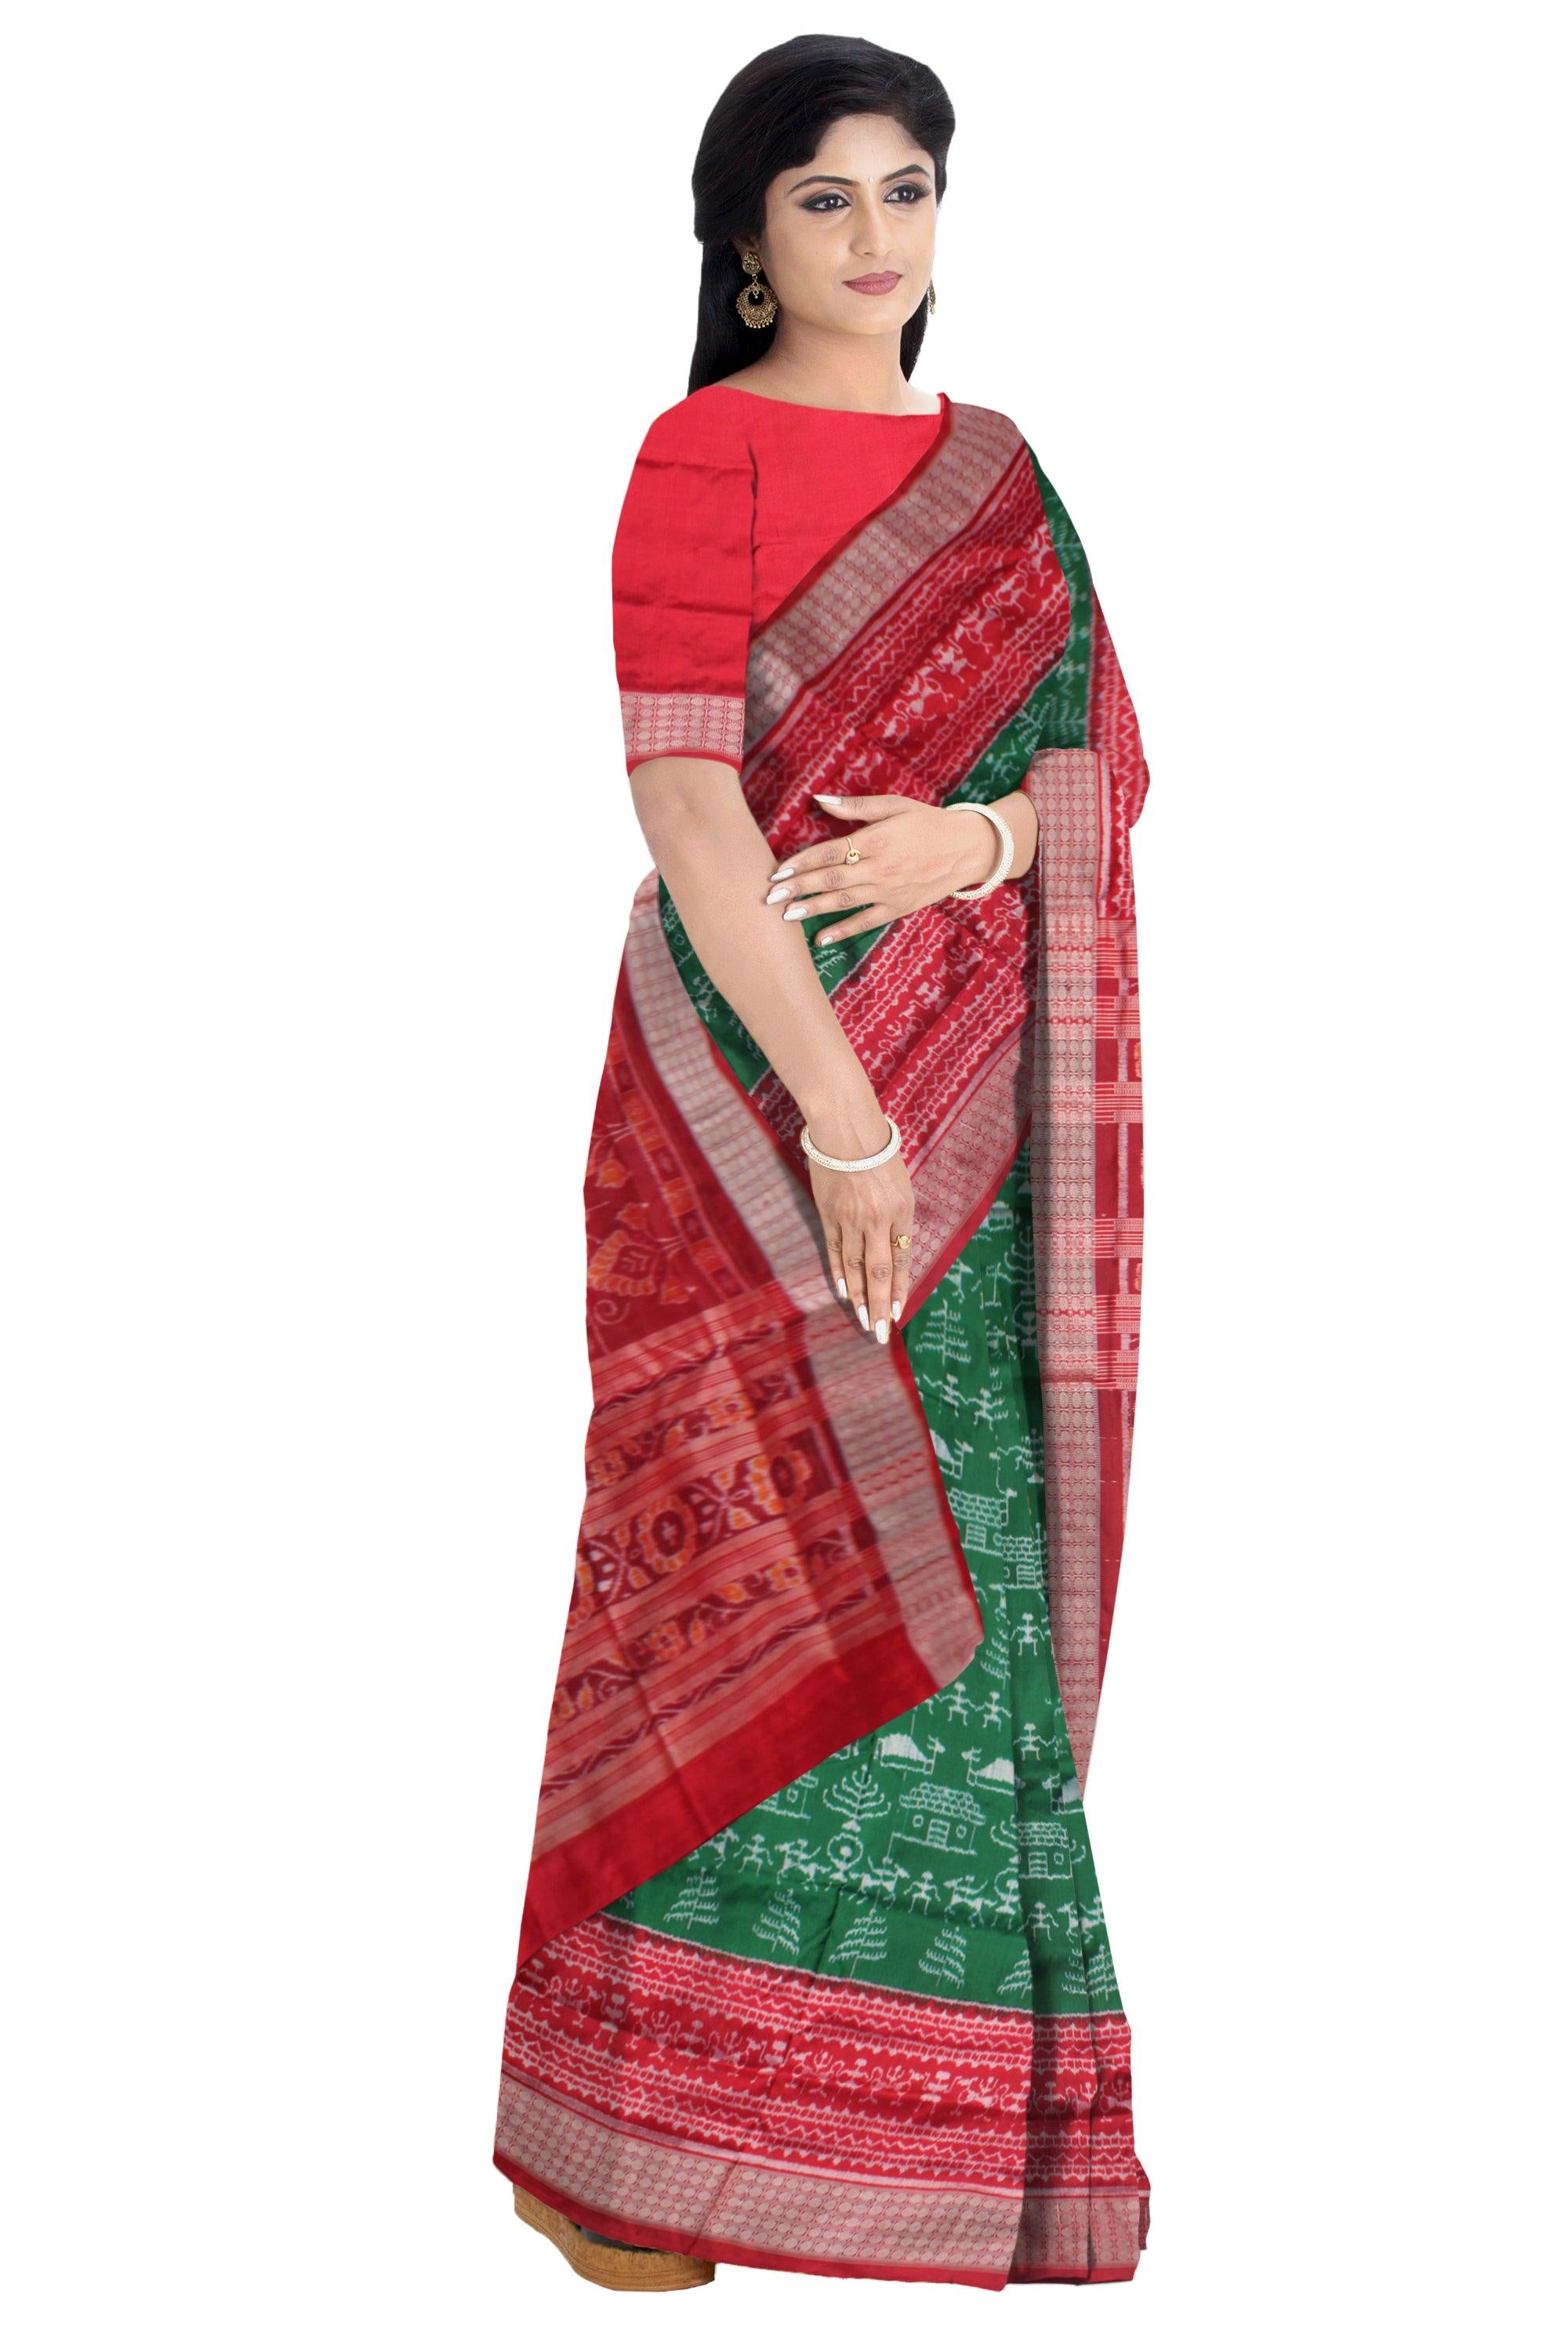 TRADITIONAL TERRACOTTA PATTERN PURE SILK SAREE IS GREEN AND RED COLOR BASE, ATTACHED WITH BLOUSE PIECE. - Koshali Arts & Crafts Enterprise